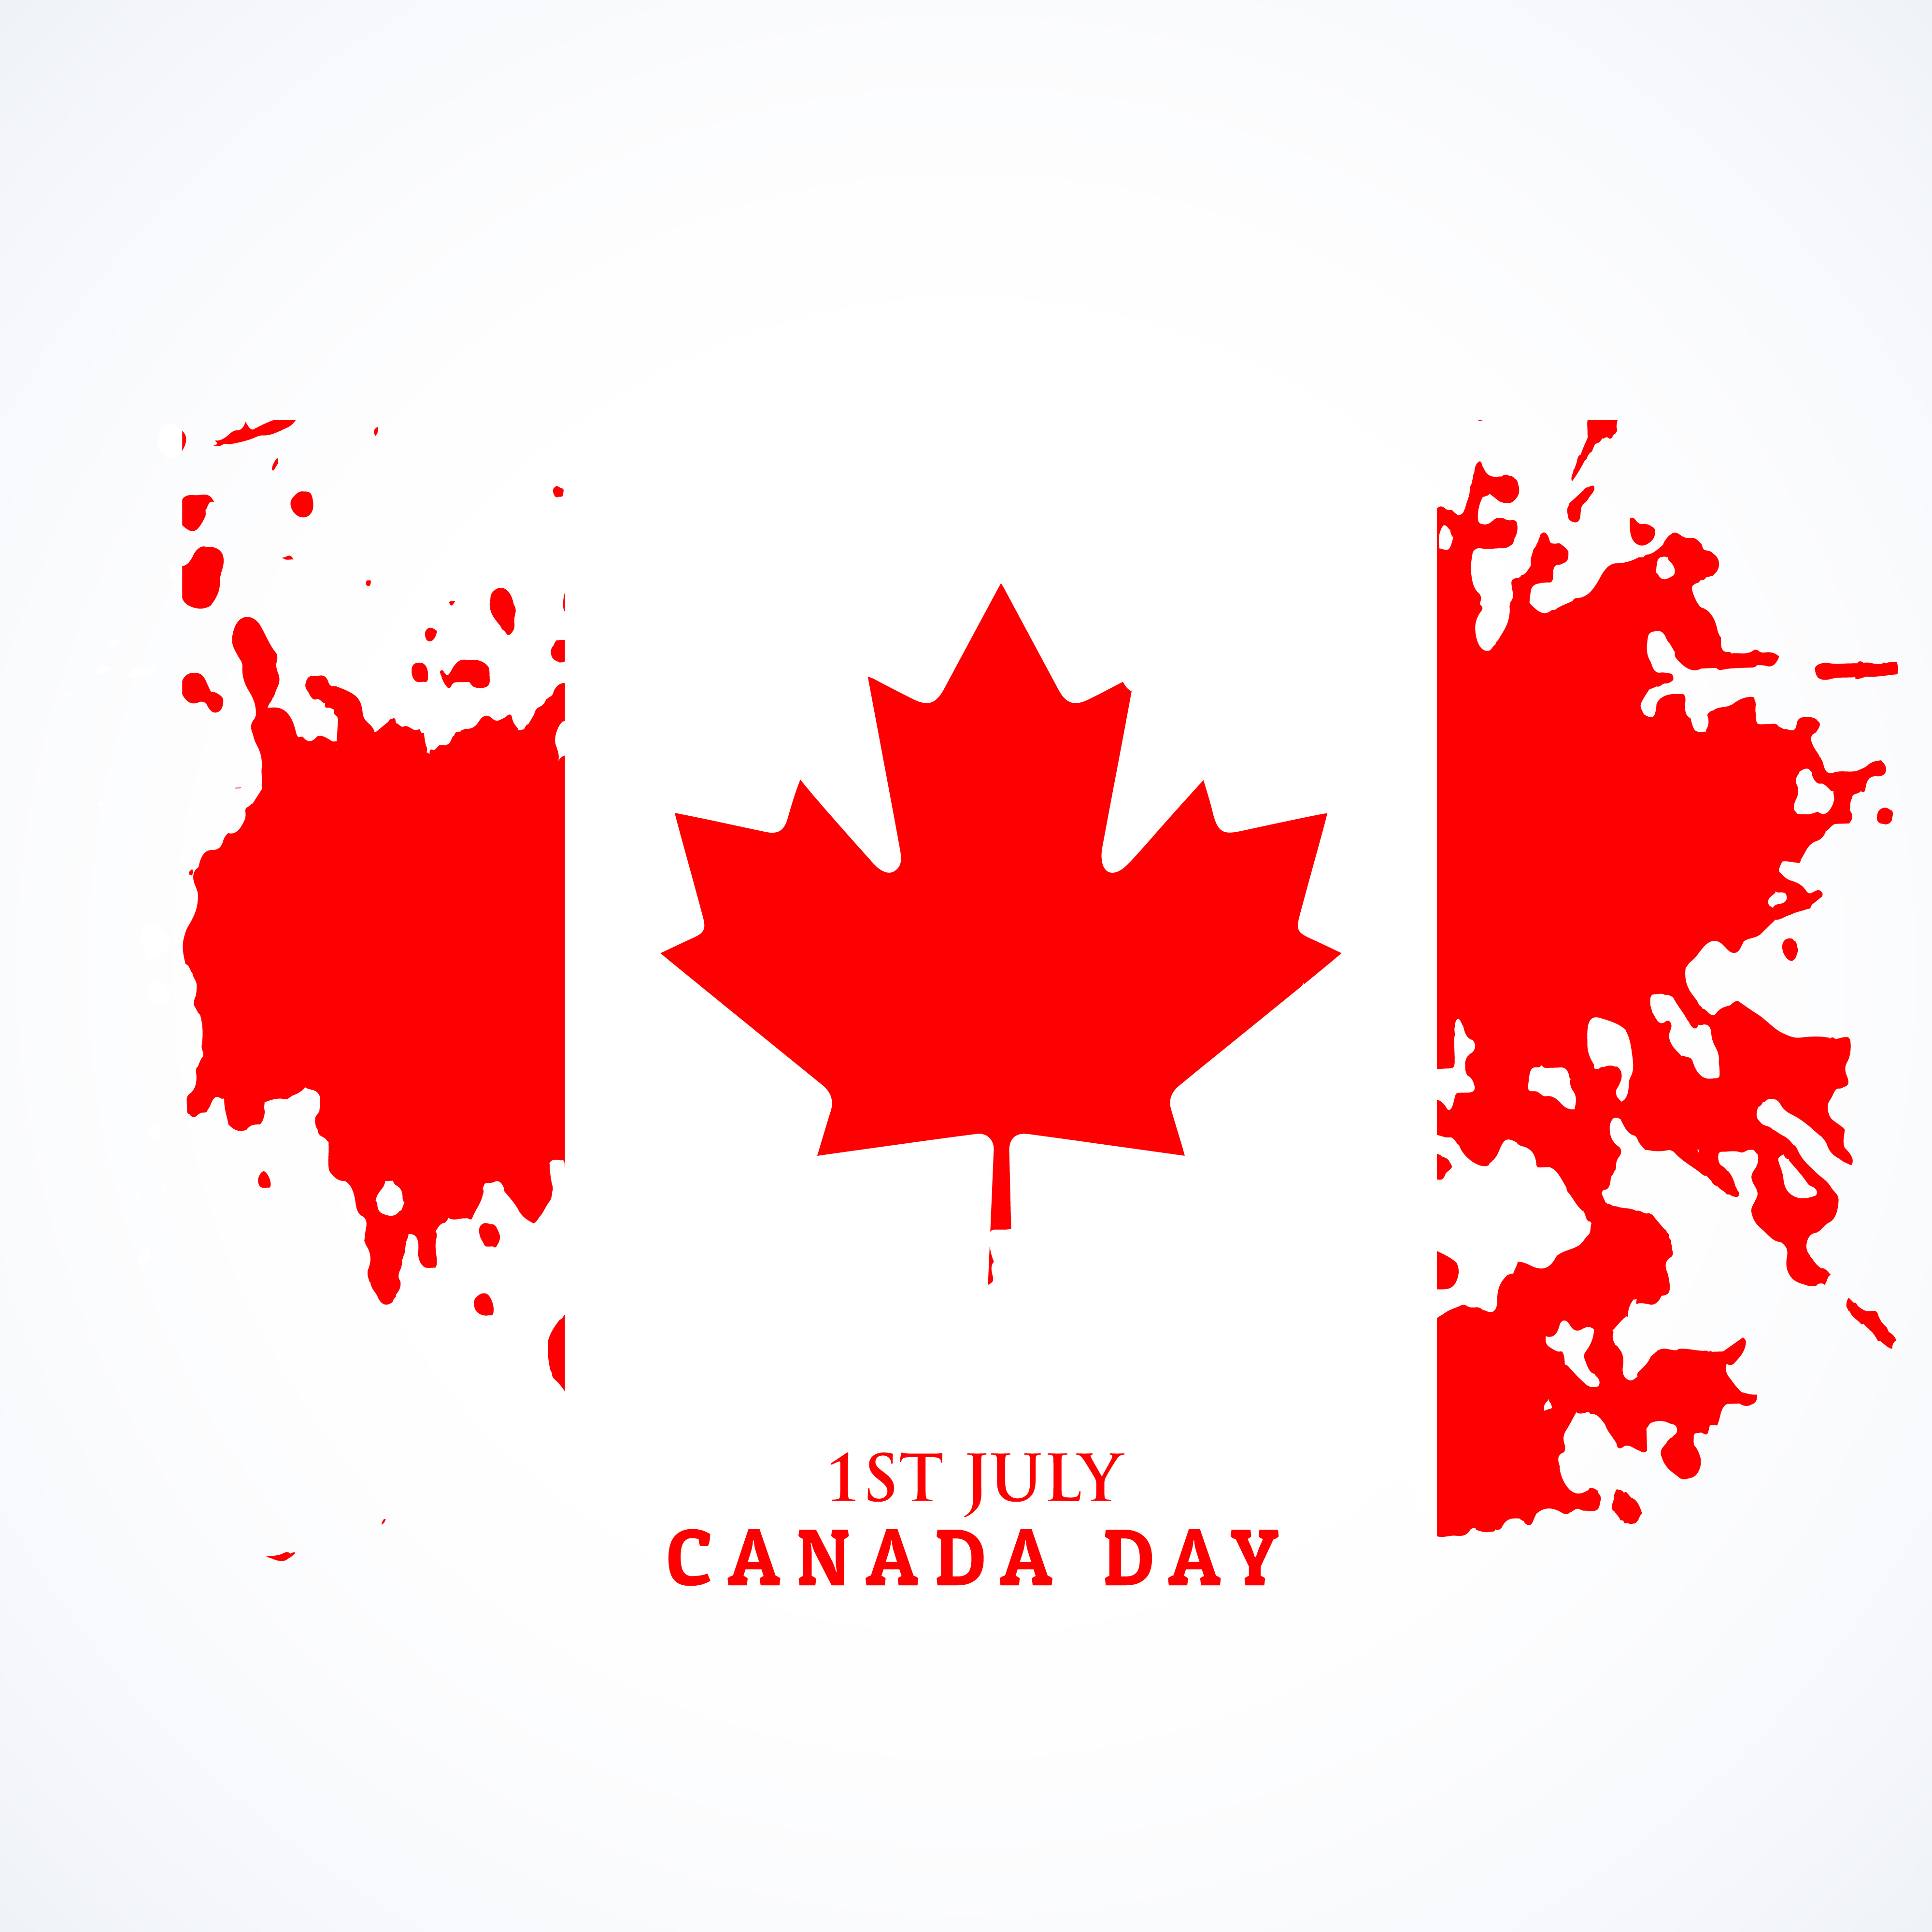 canadian flag in grunge style Download Free Vector Art